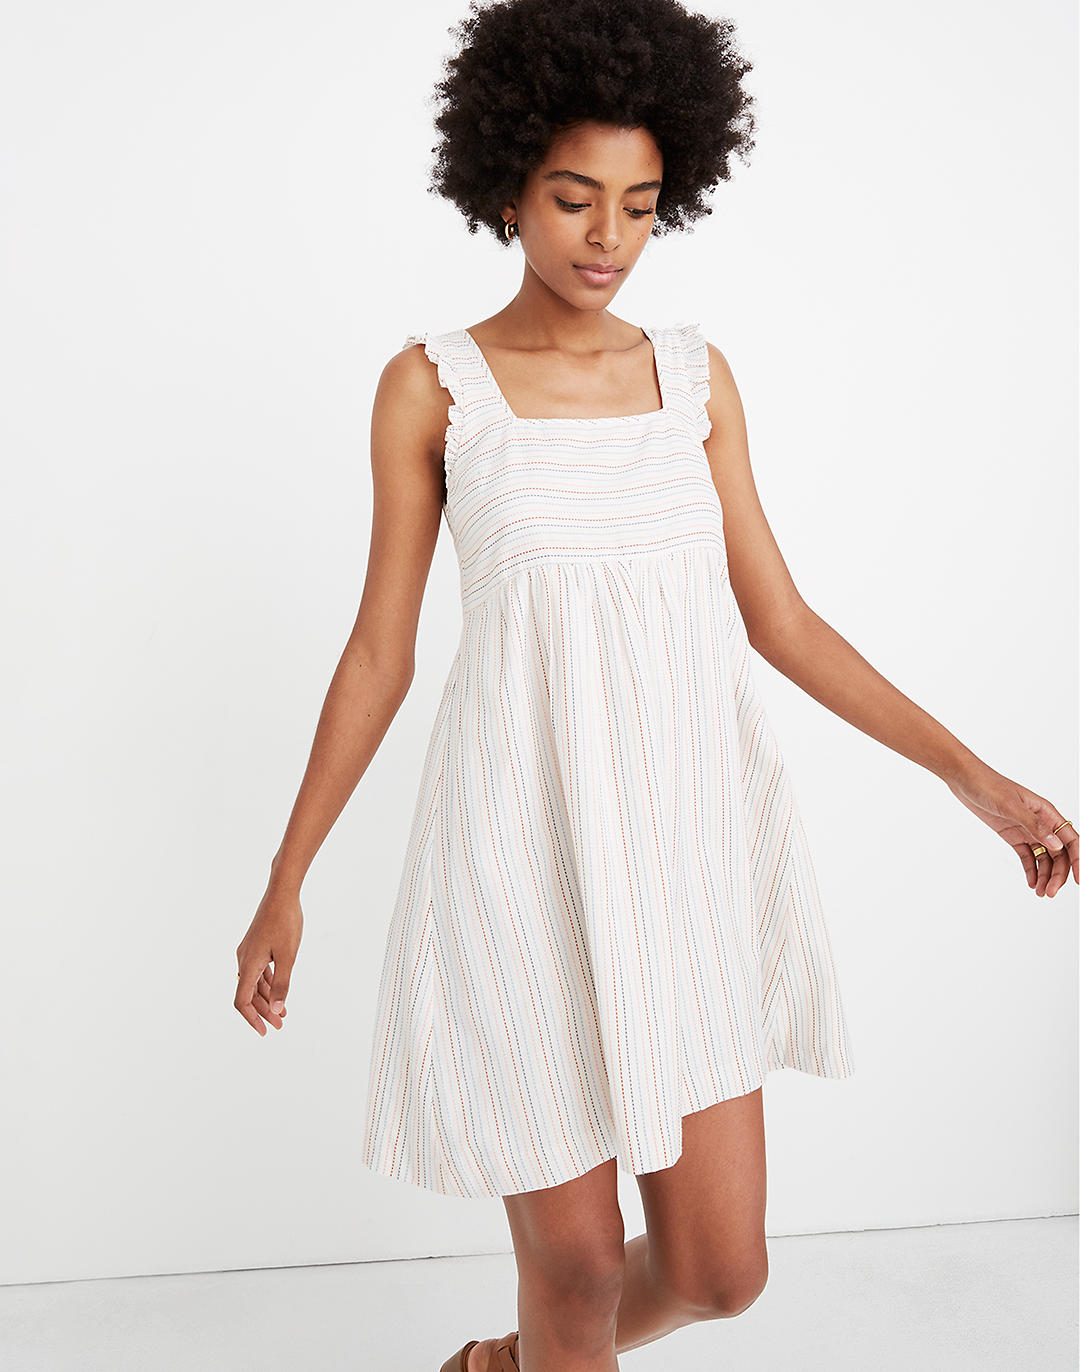 Ruffled Square-Neck Dress in Stitched Rainbow Stripe